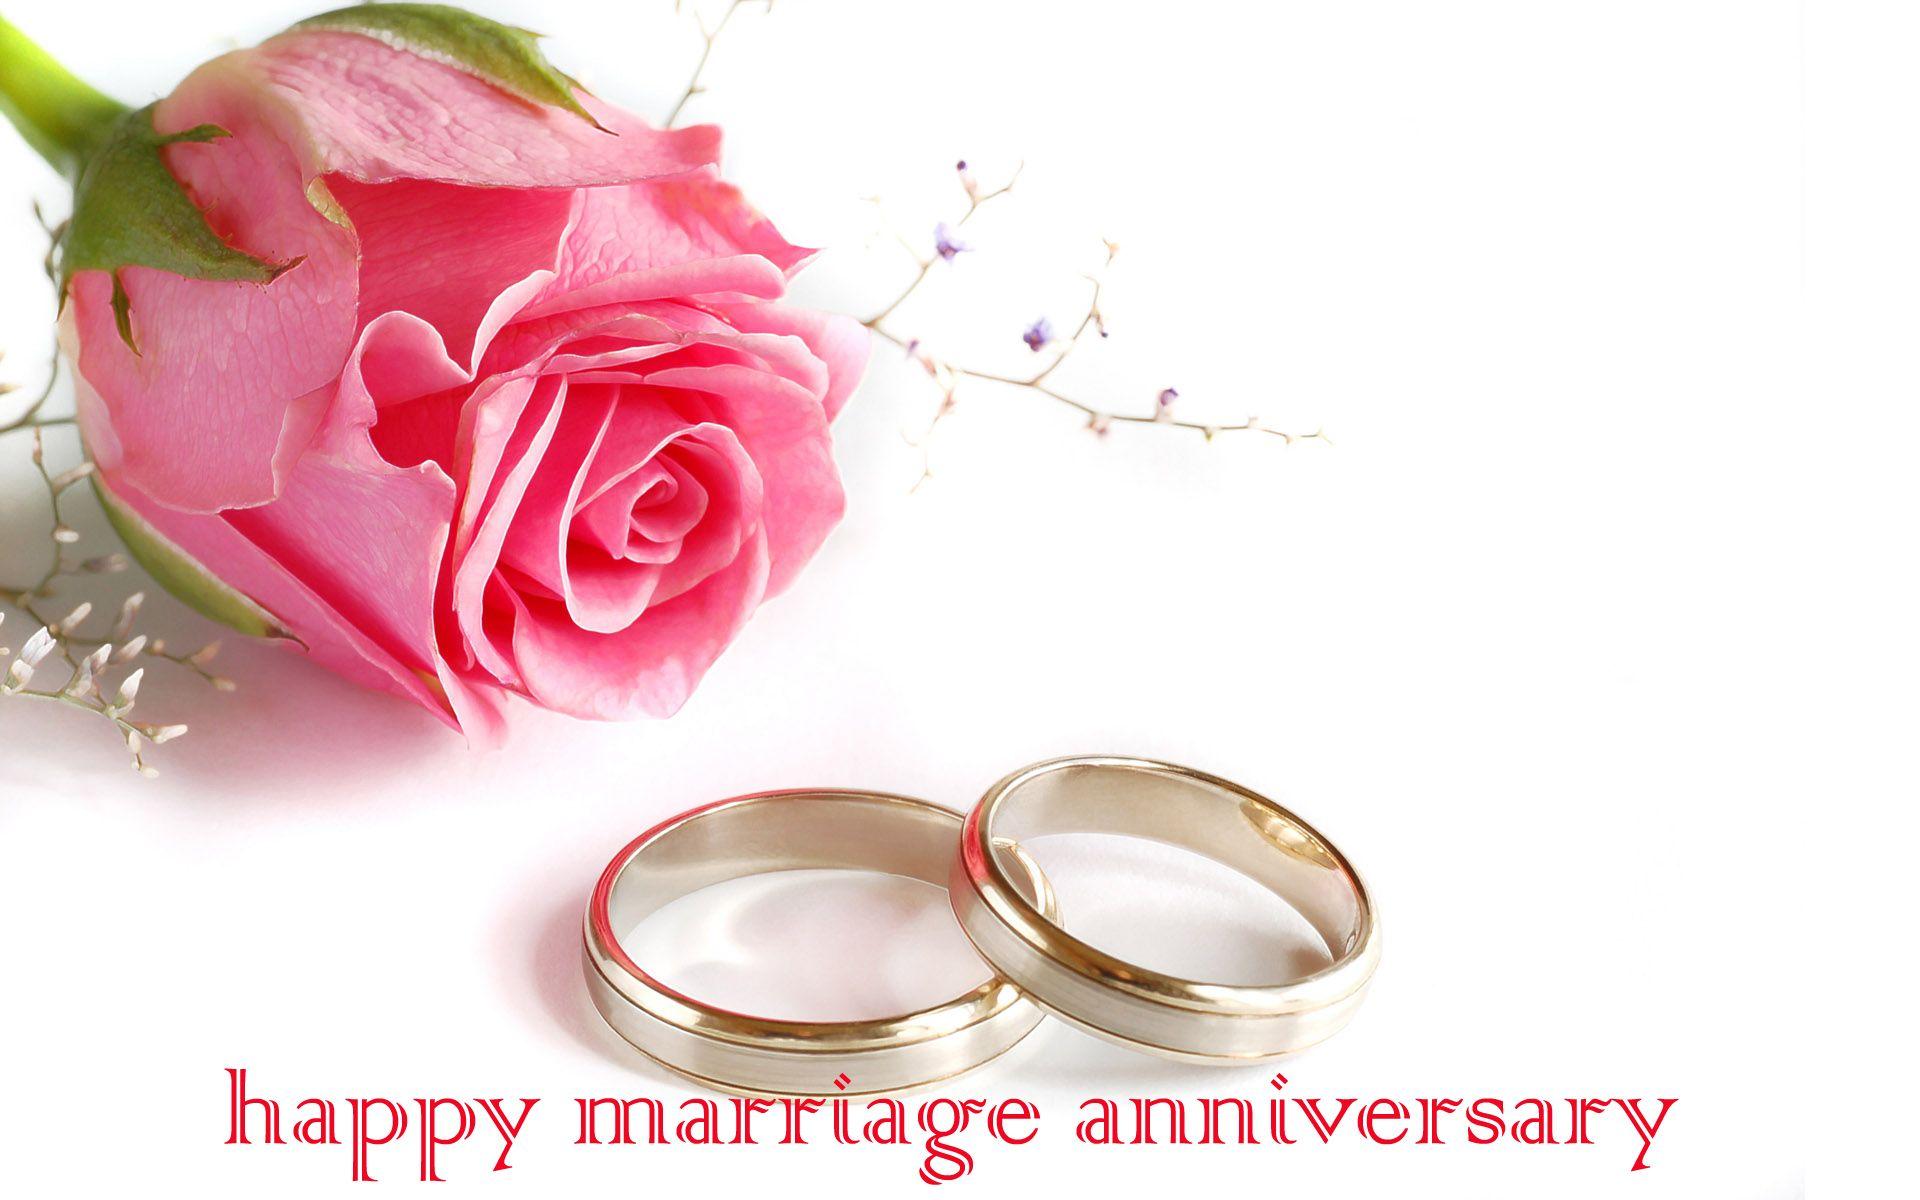 Zolmovies Happy Married Anniversary Wedding Anniversary Wishes Images